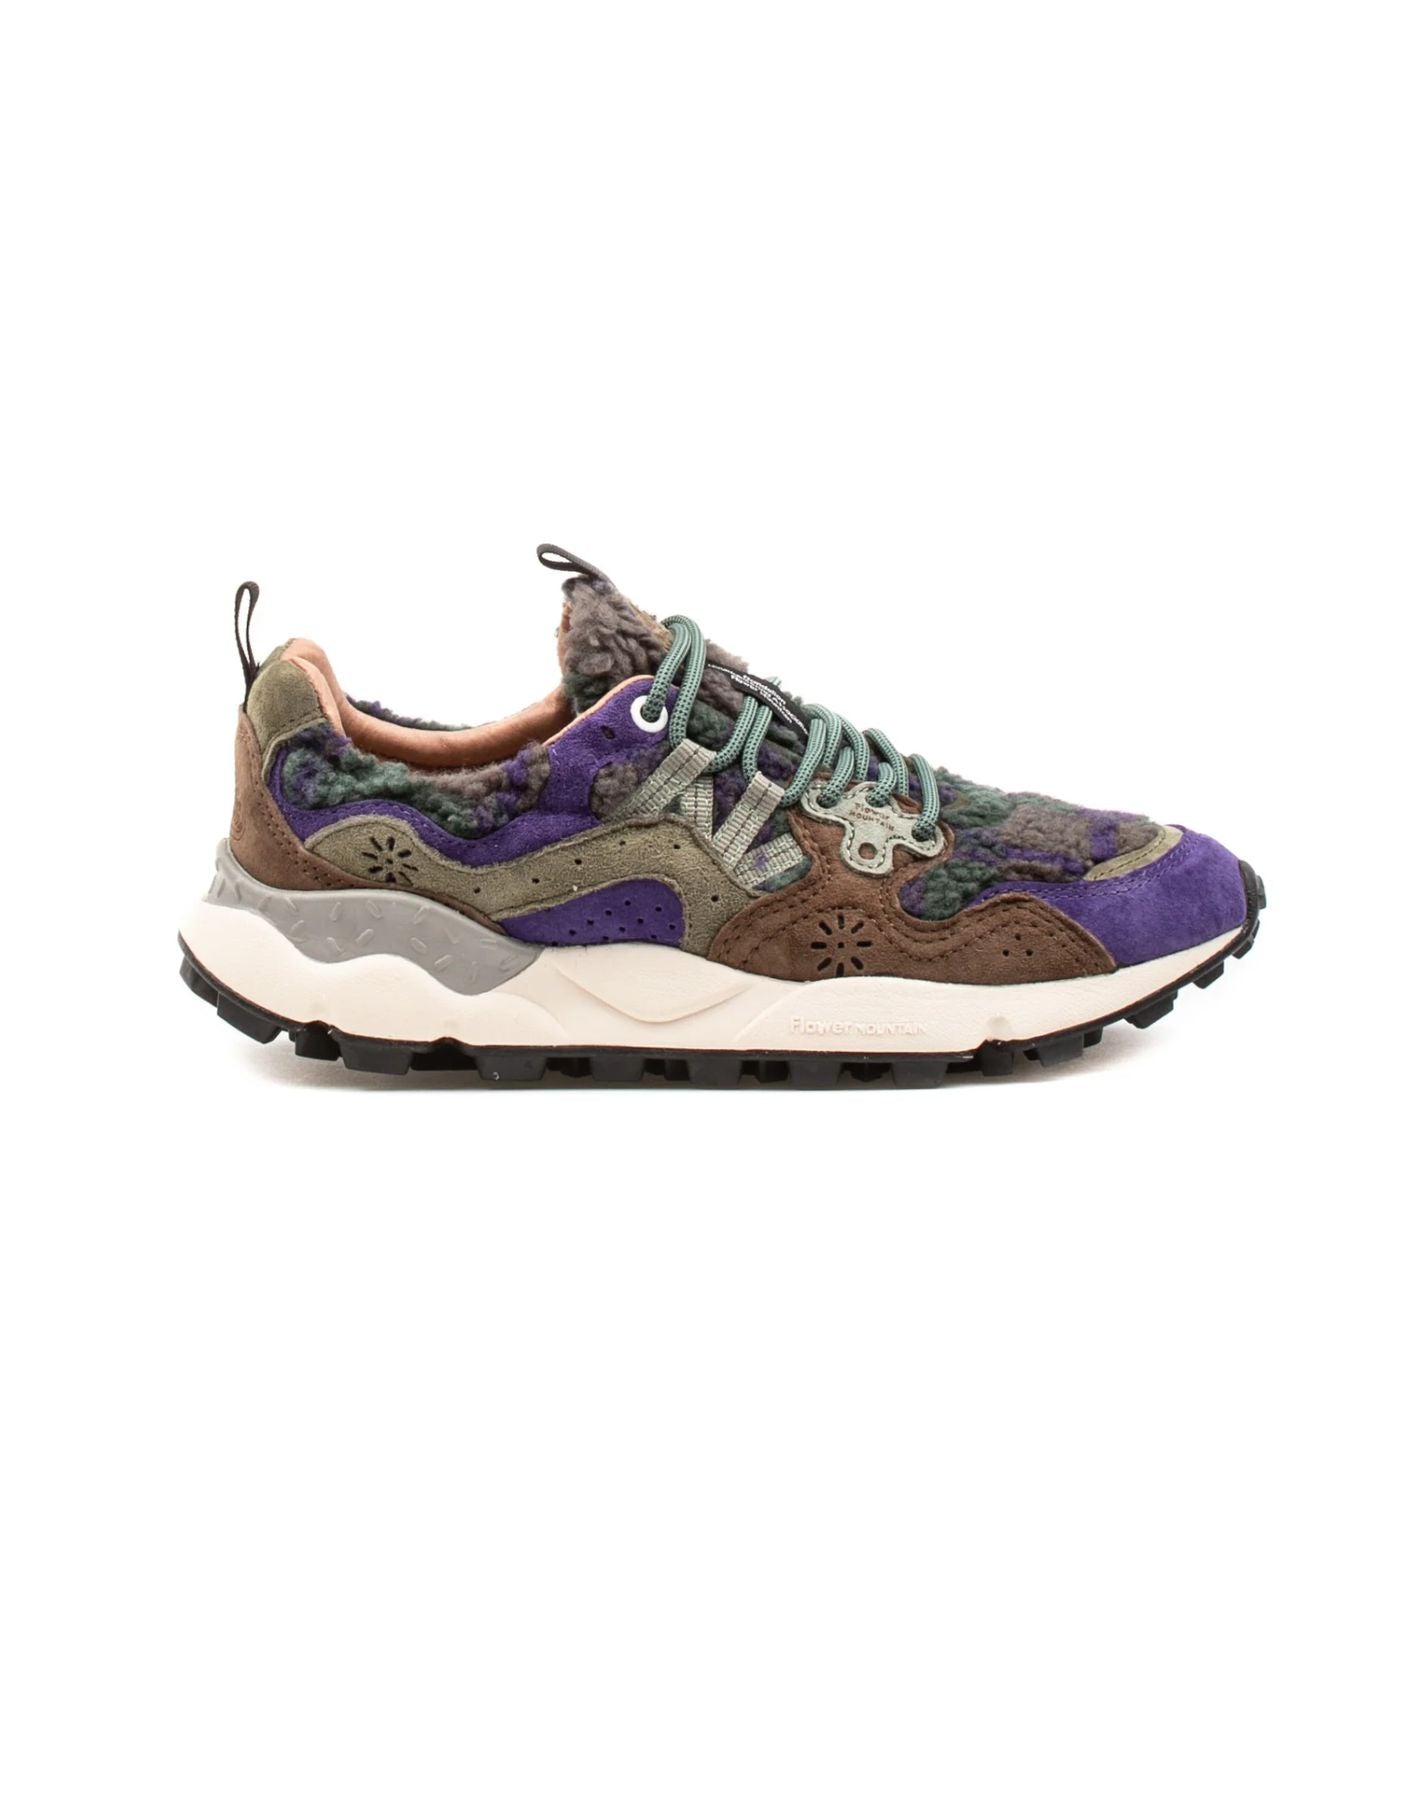 Shoes for woman  YAMANO 3 UNI VIOLET BROWN Flower Mountain